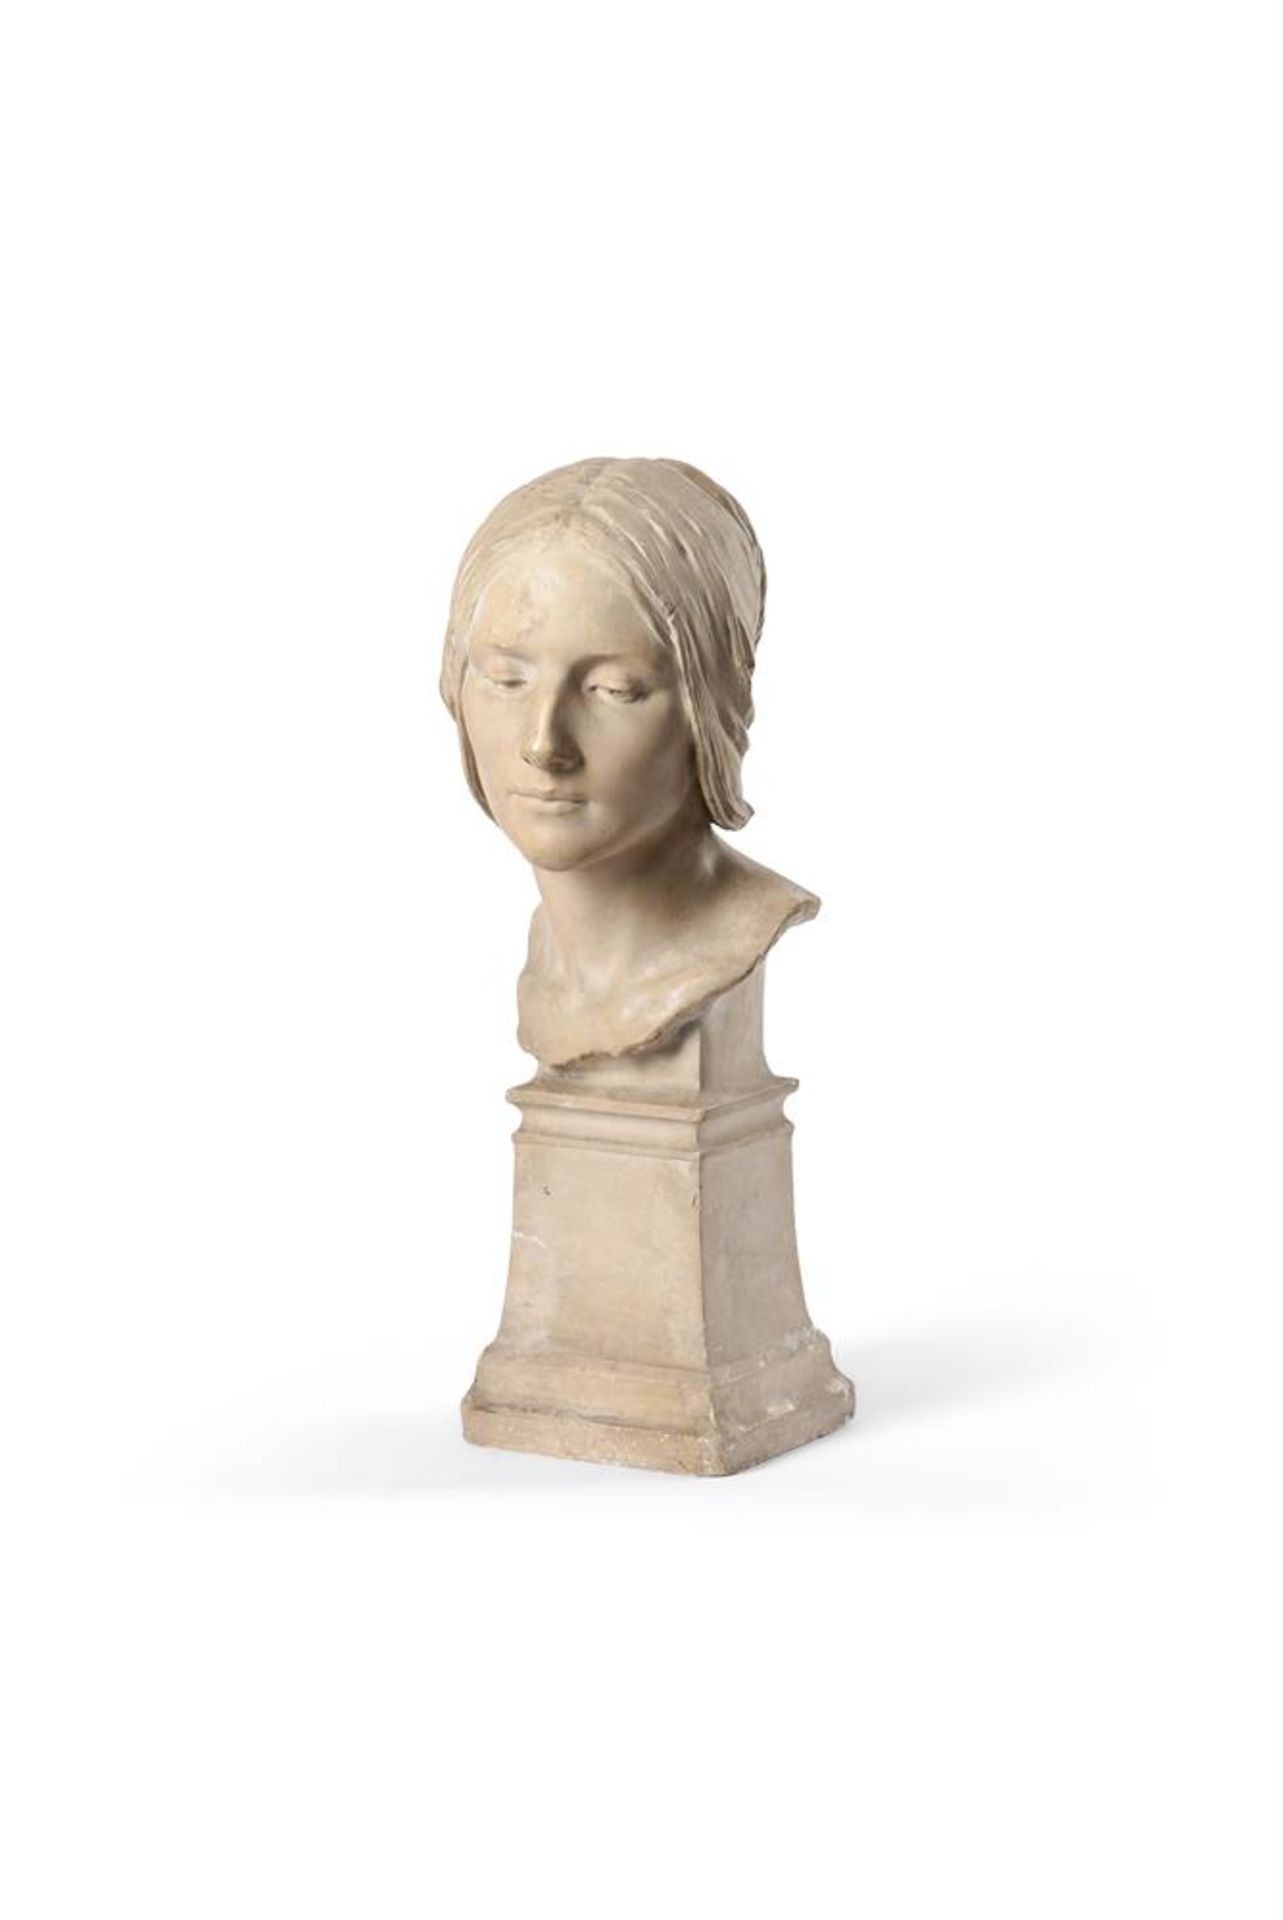 AFTER FREDERICK JAMES HALNON (BRITISH, 1881-1958), A PLASTER BUST, EARLY 20TH CENTURY - Image 3 of 5